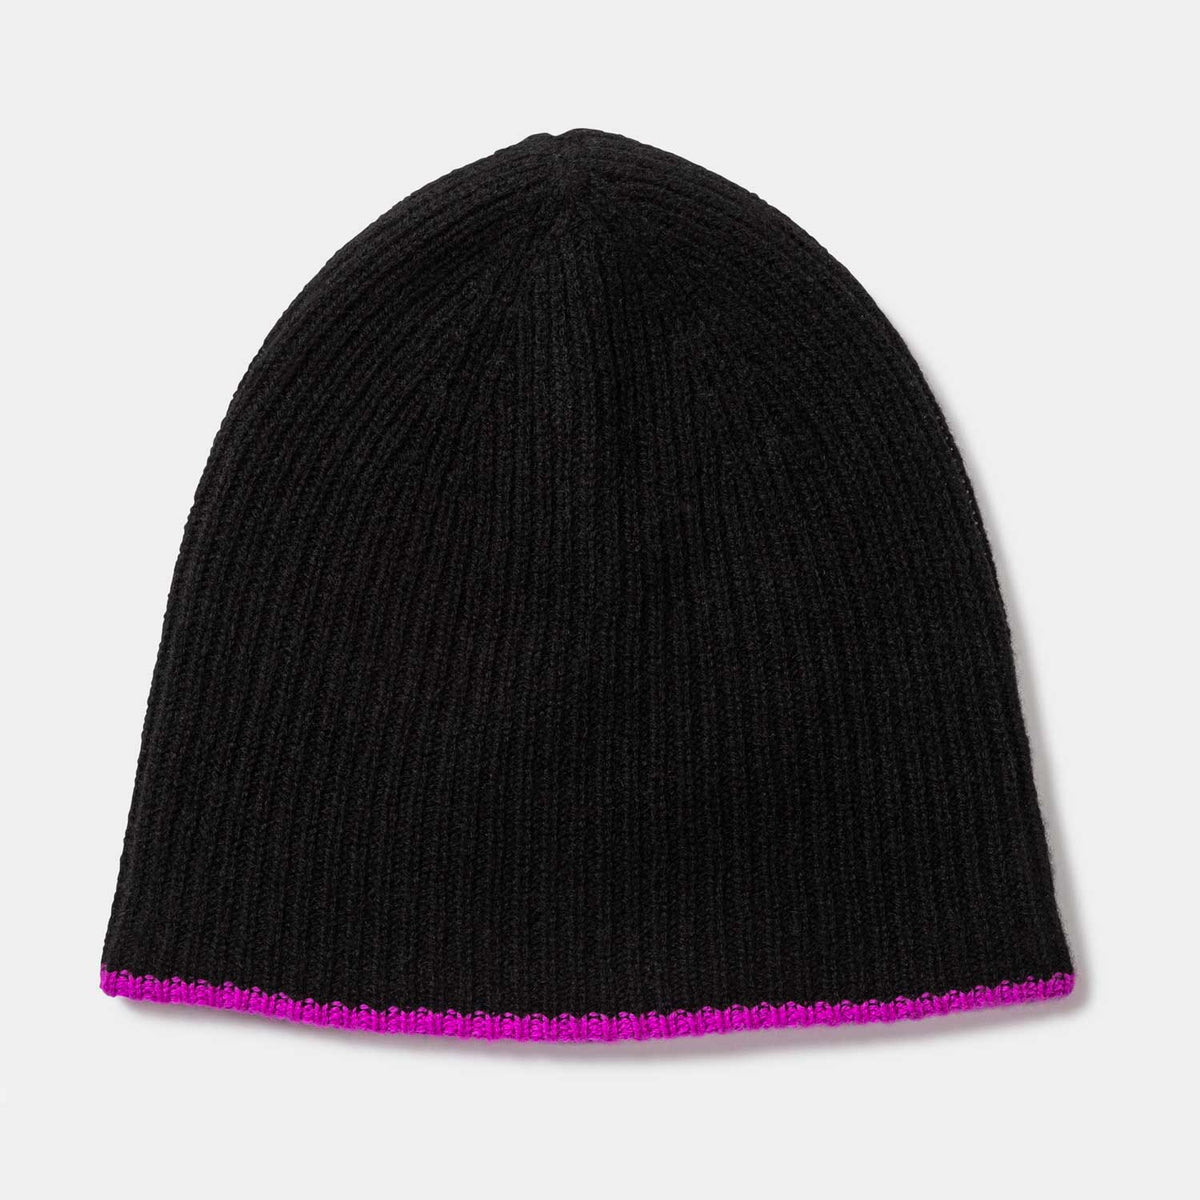 Picture of a double layer knit slouchy hat with colorful tipping in black with pink.